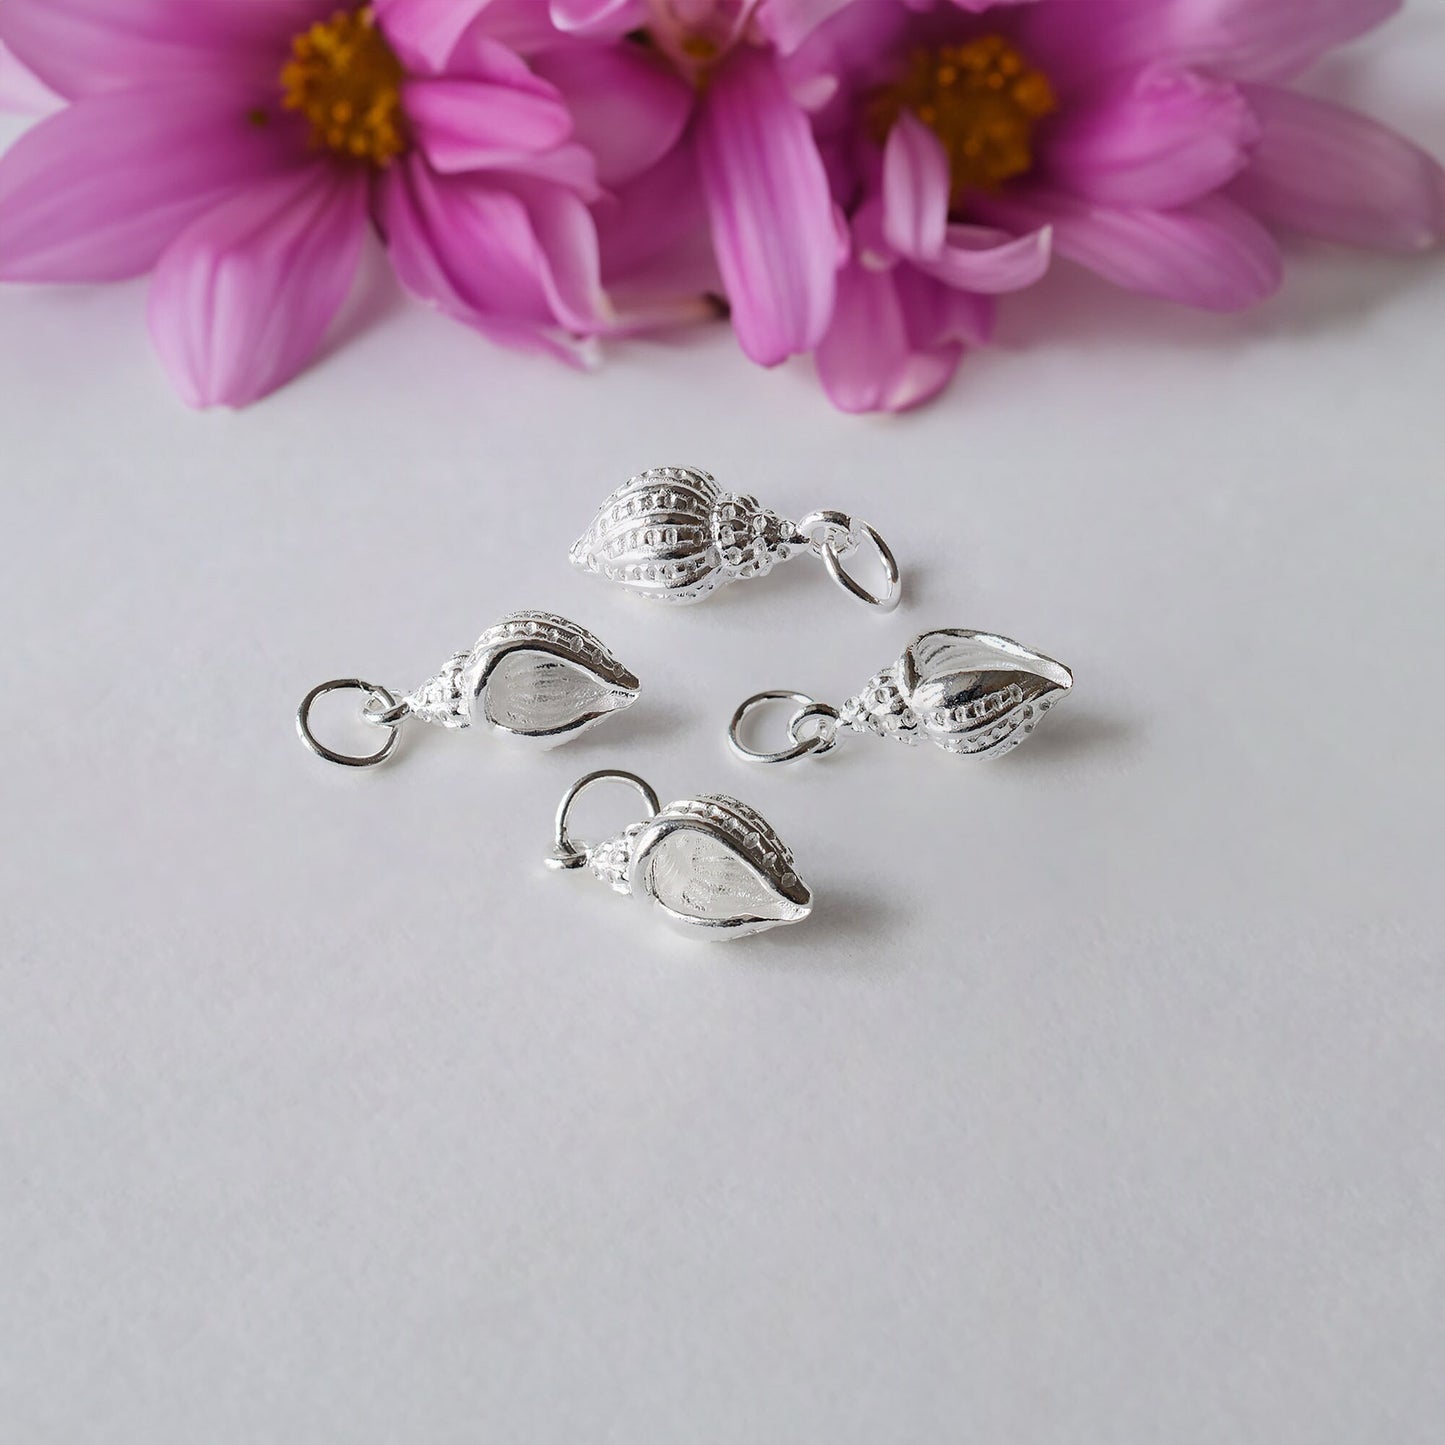 Solid 925 Sterling Silver Conch-Shaped Charms, Seashell Charm for Necklace, Small Shiny Conch, Shell Charms, Ocean Charms, Sea Charms Gift